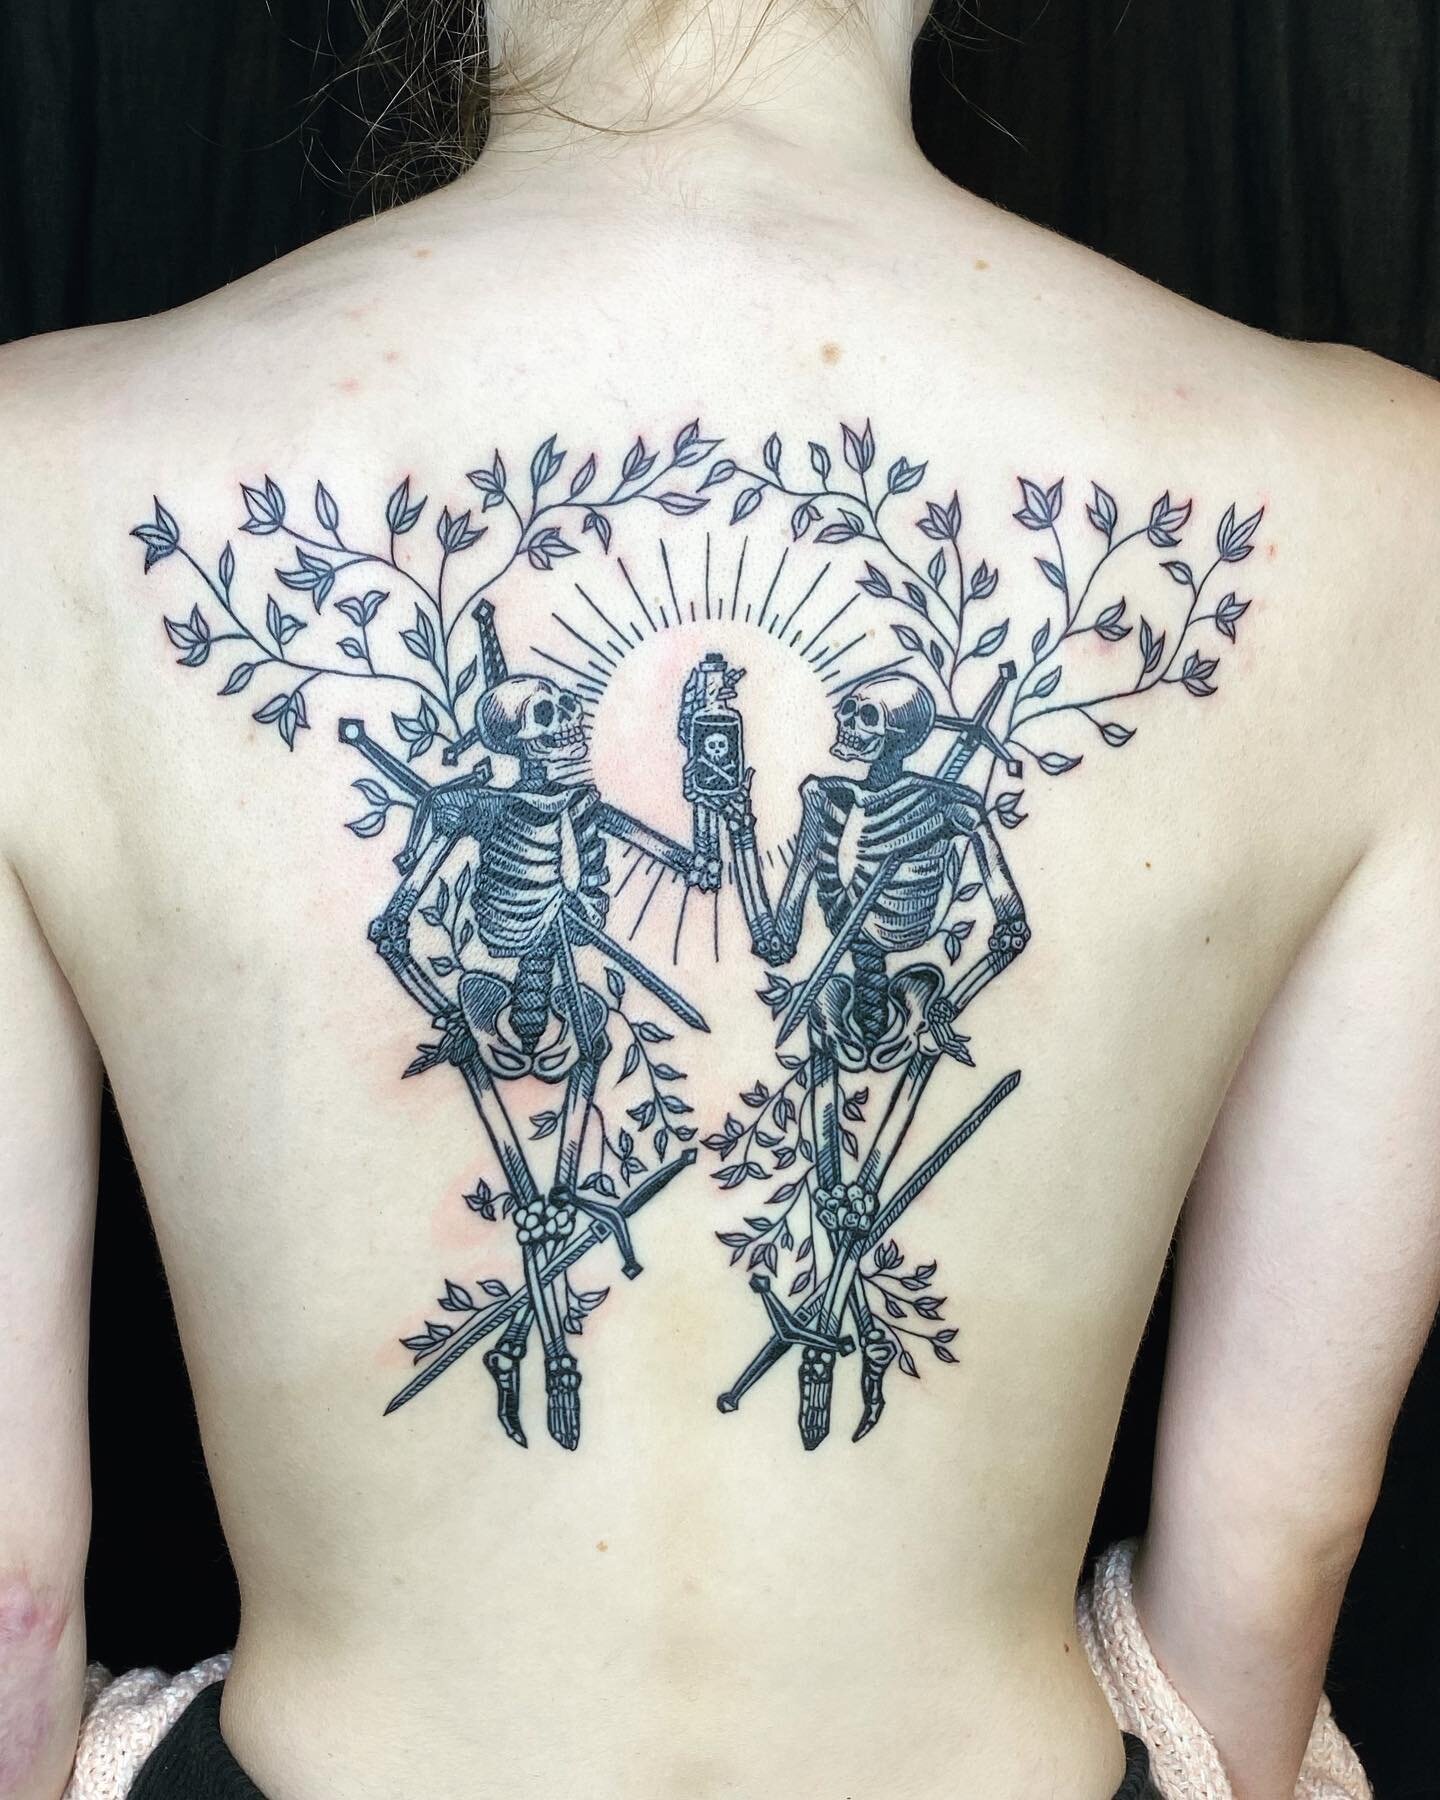 first big back tattoo i&rsquo;ve done so far, thanks for the trust ambrosine!

skeleton design by @micah_ulrich 
done at @familytattoo